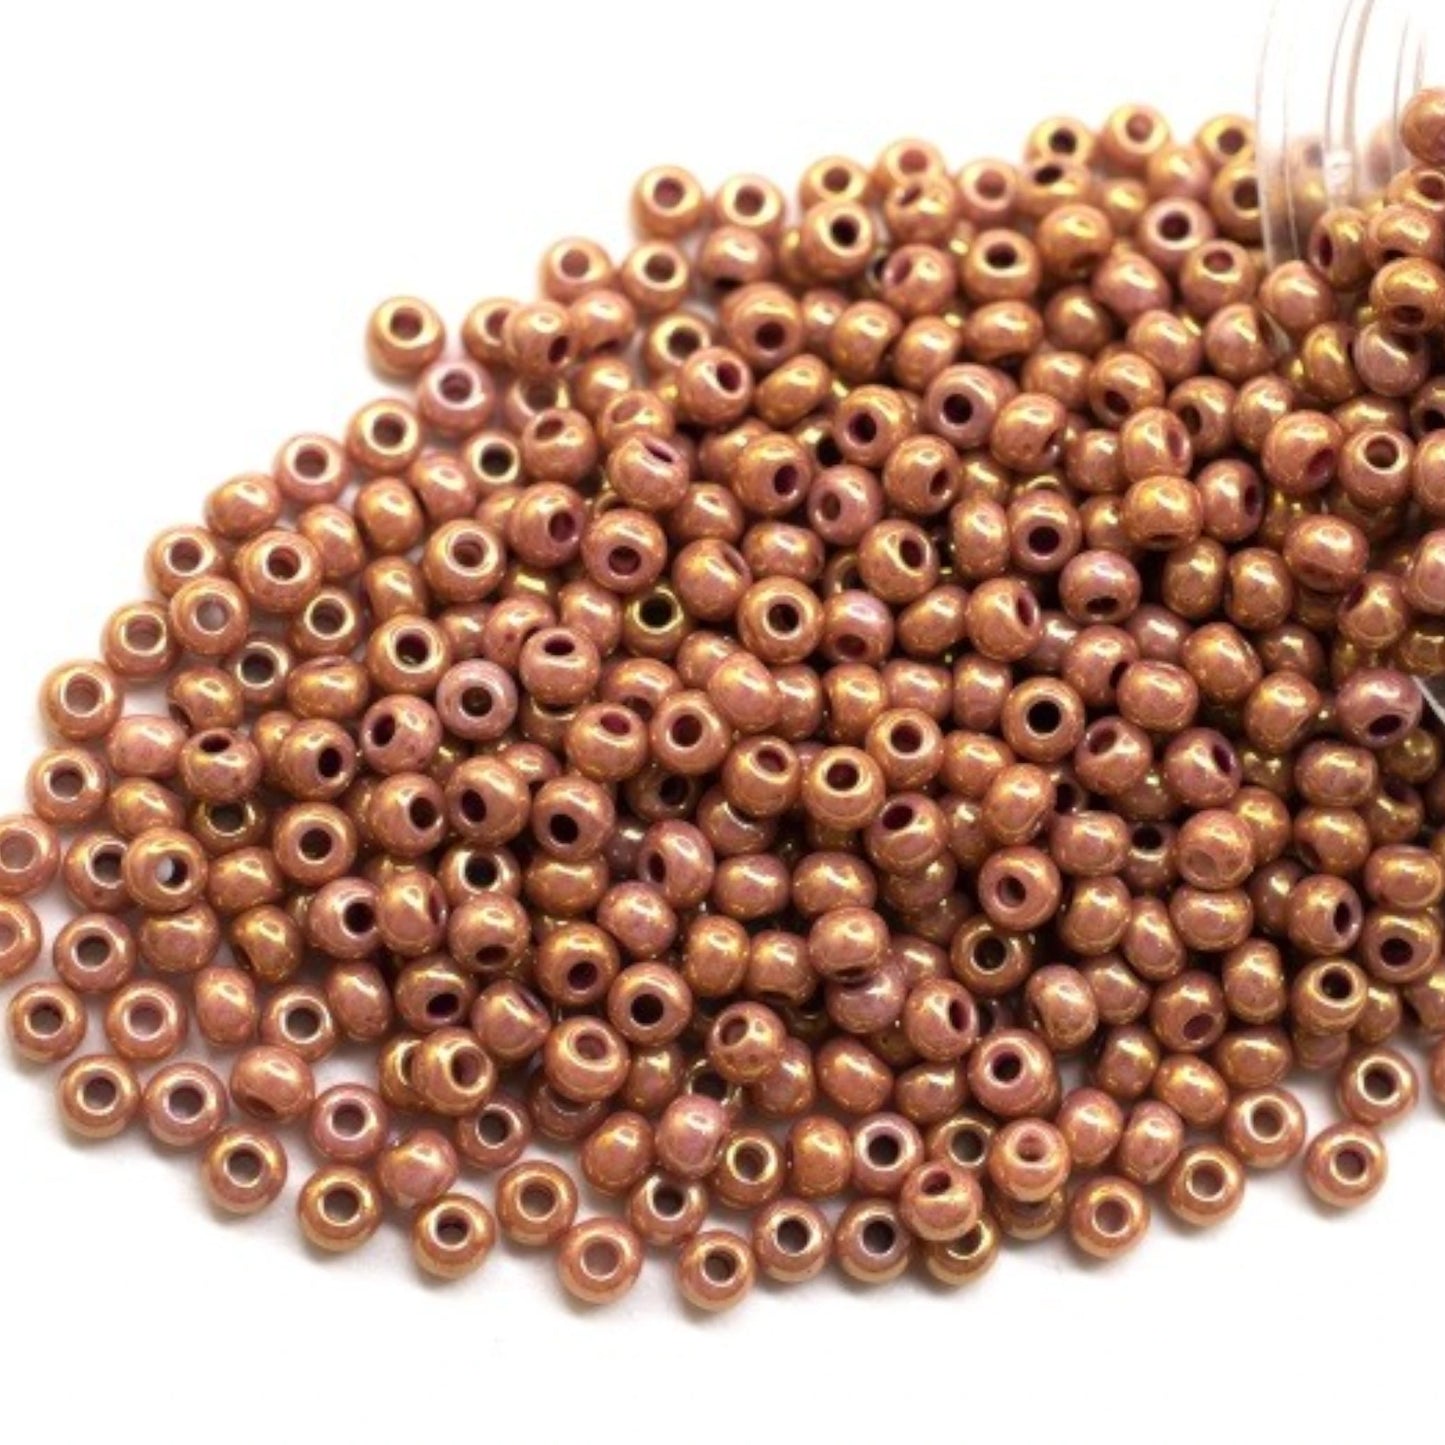 46095 Czech Seed Beads Preciosa Rocailles Opaque - Color Lustered